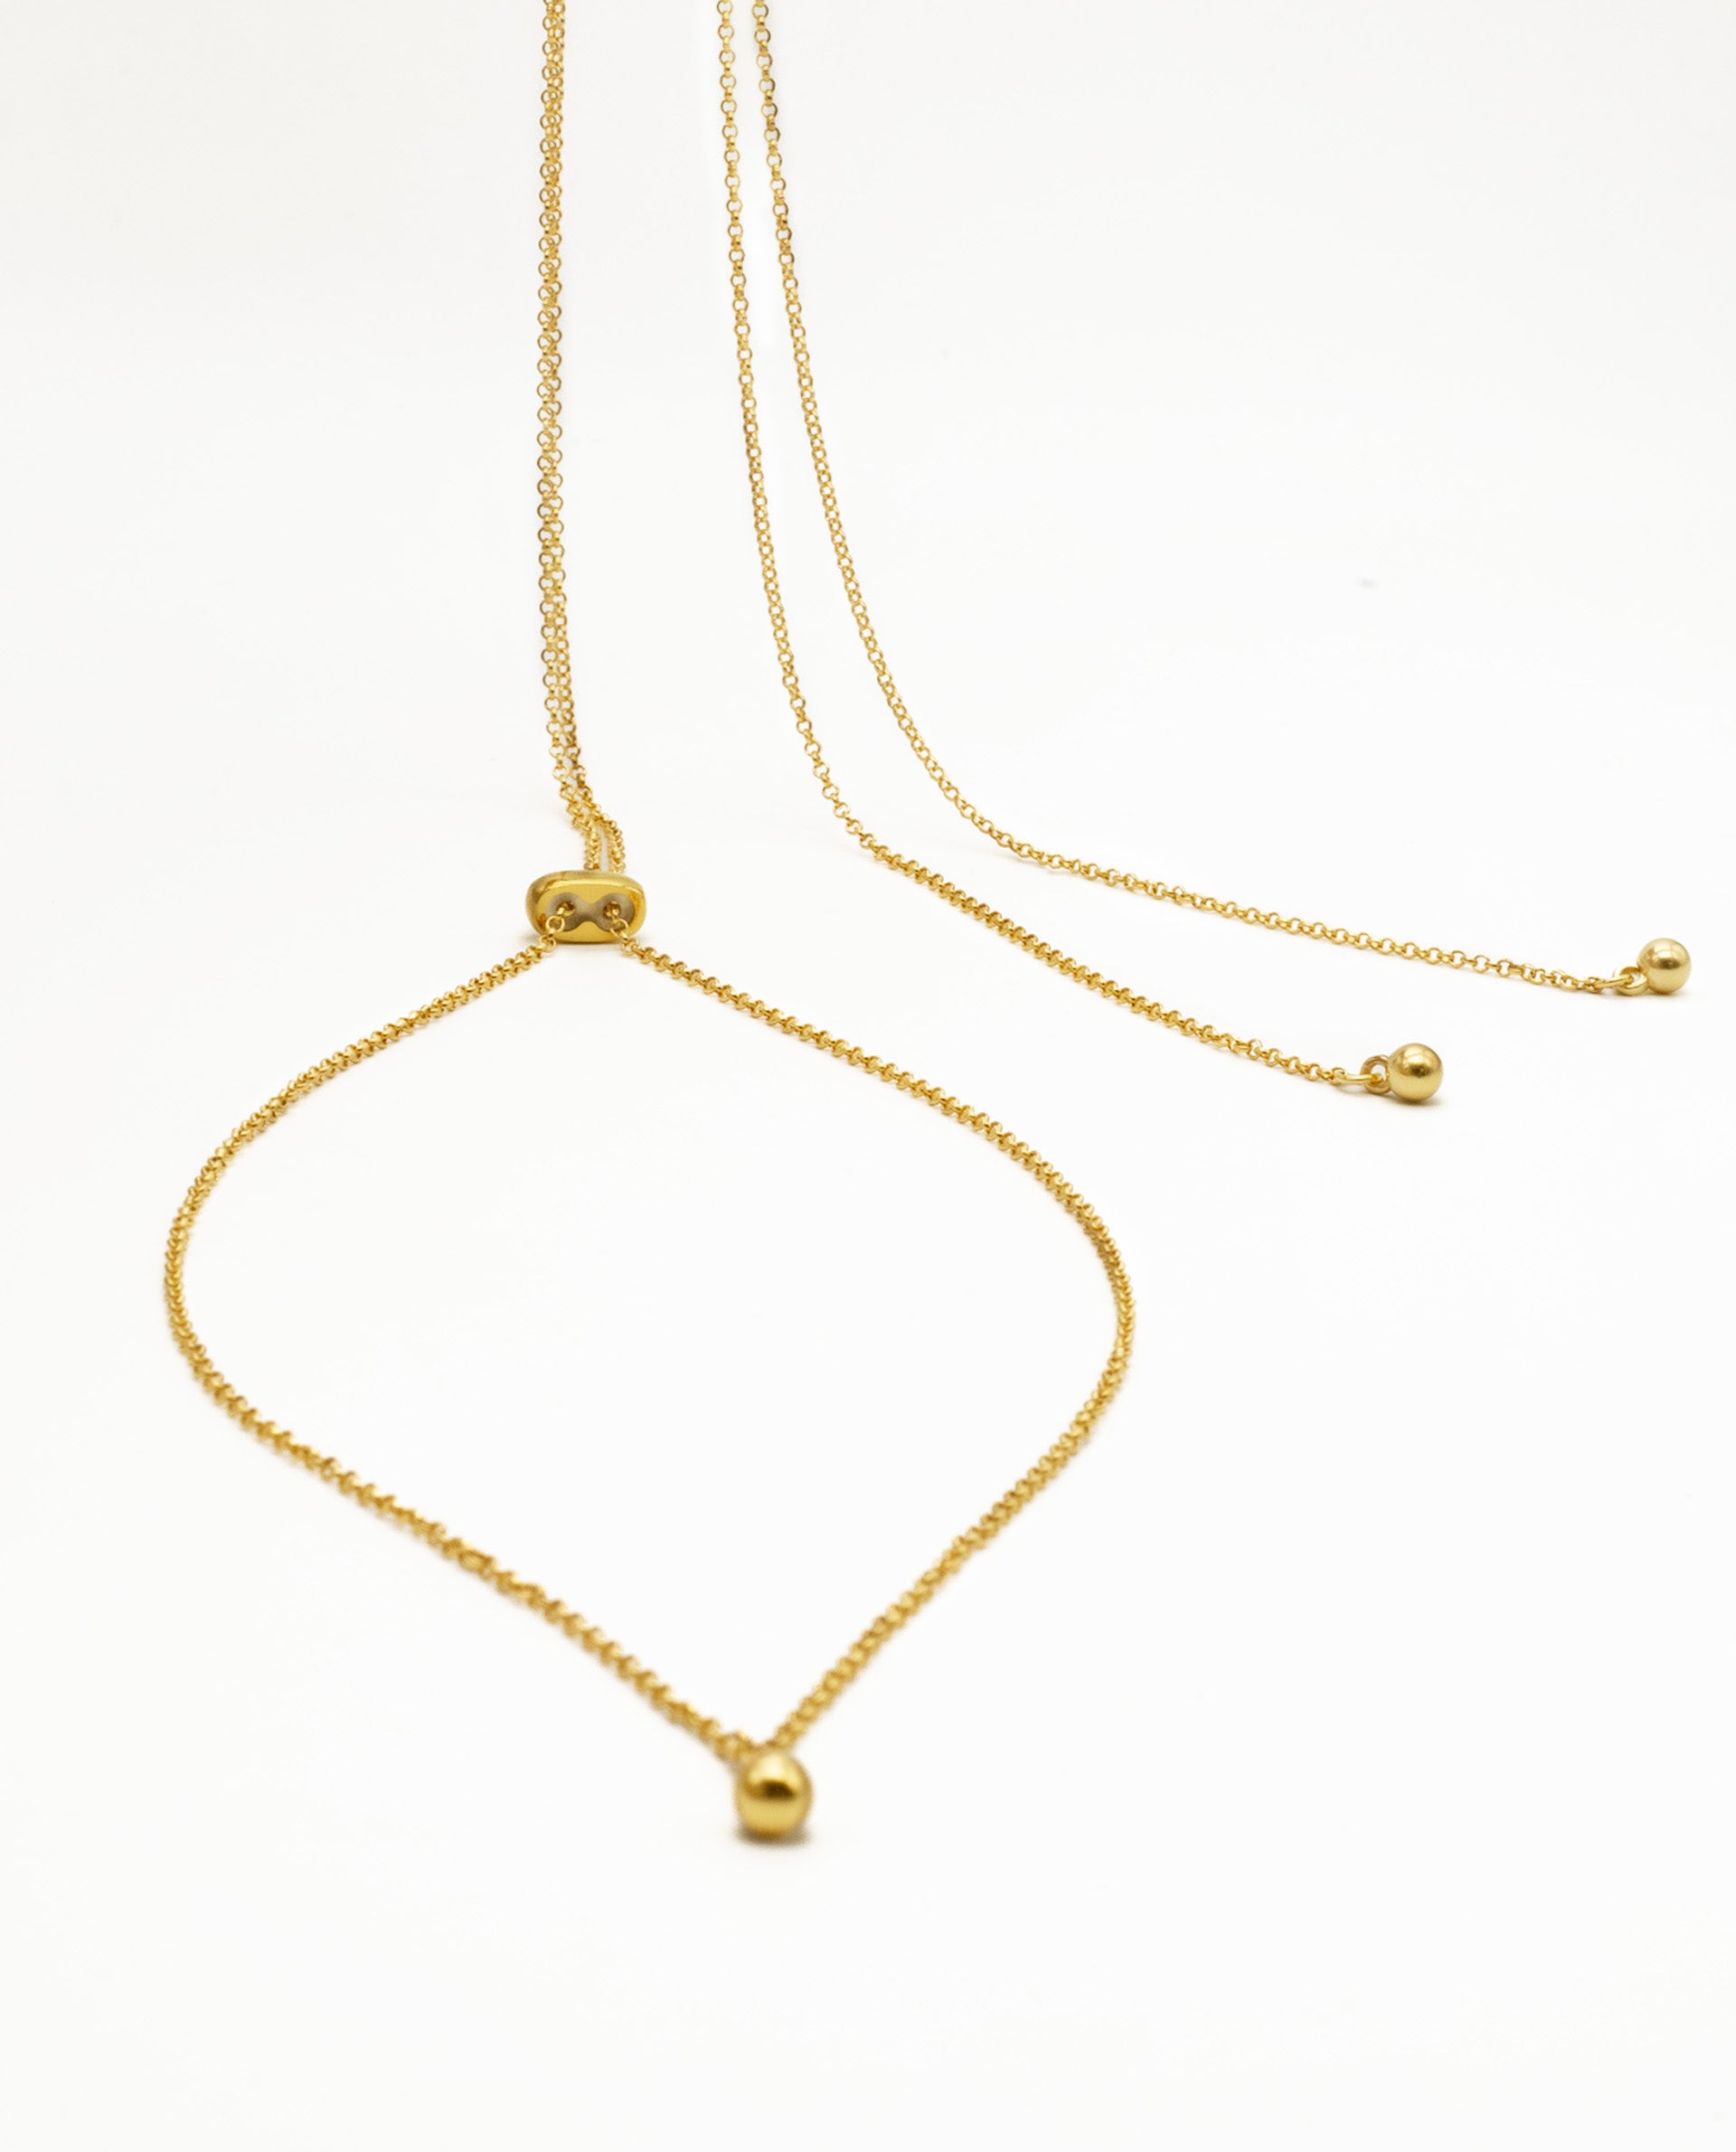 RIVER NECKLACE - GOLD PLATED